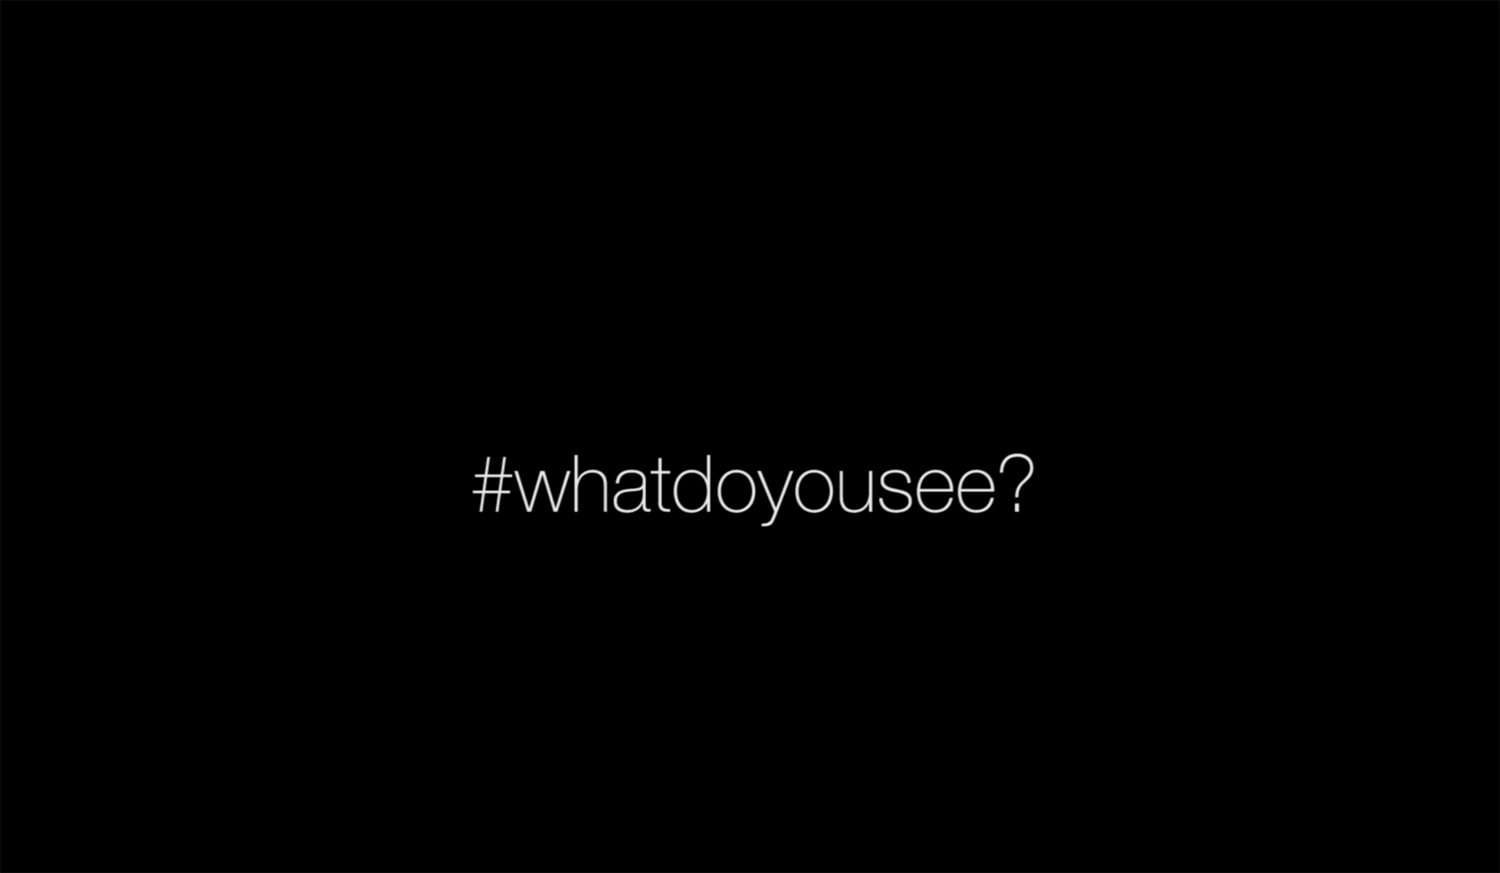 #WhatDoYouSee a video just over four minutes conveys a message of hope and initiates a much needed online dialogue